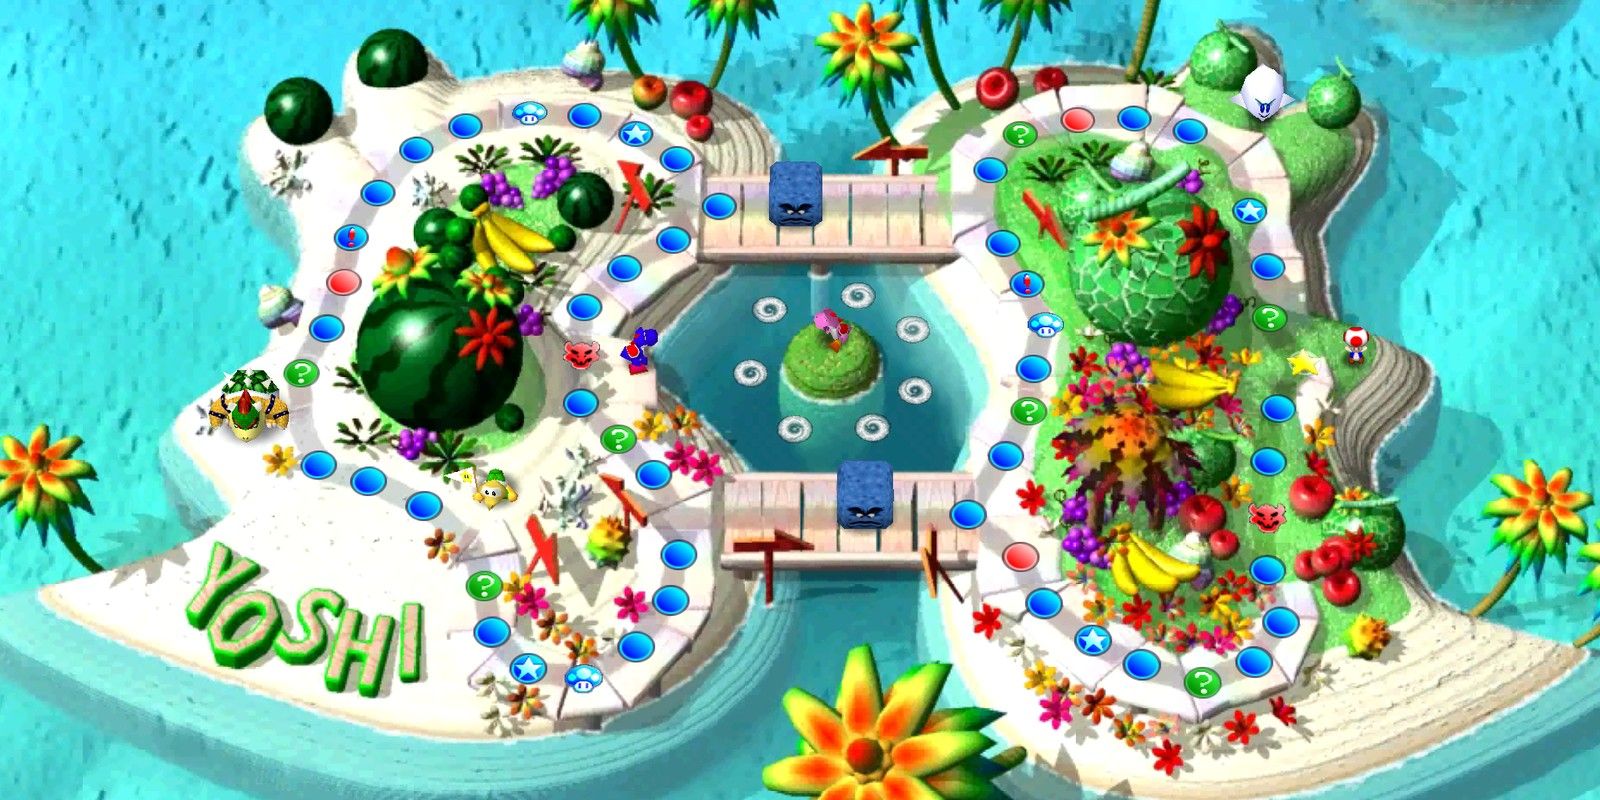 An overview of Yoshi's Tropical Island from the first Mario Party